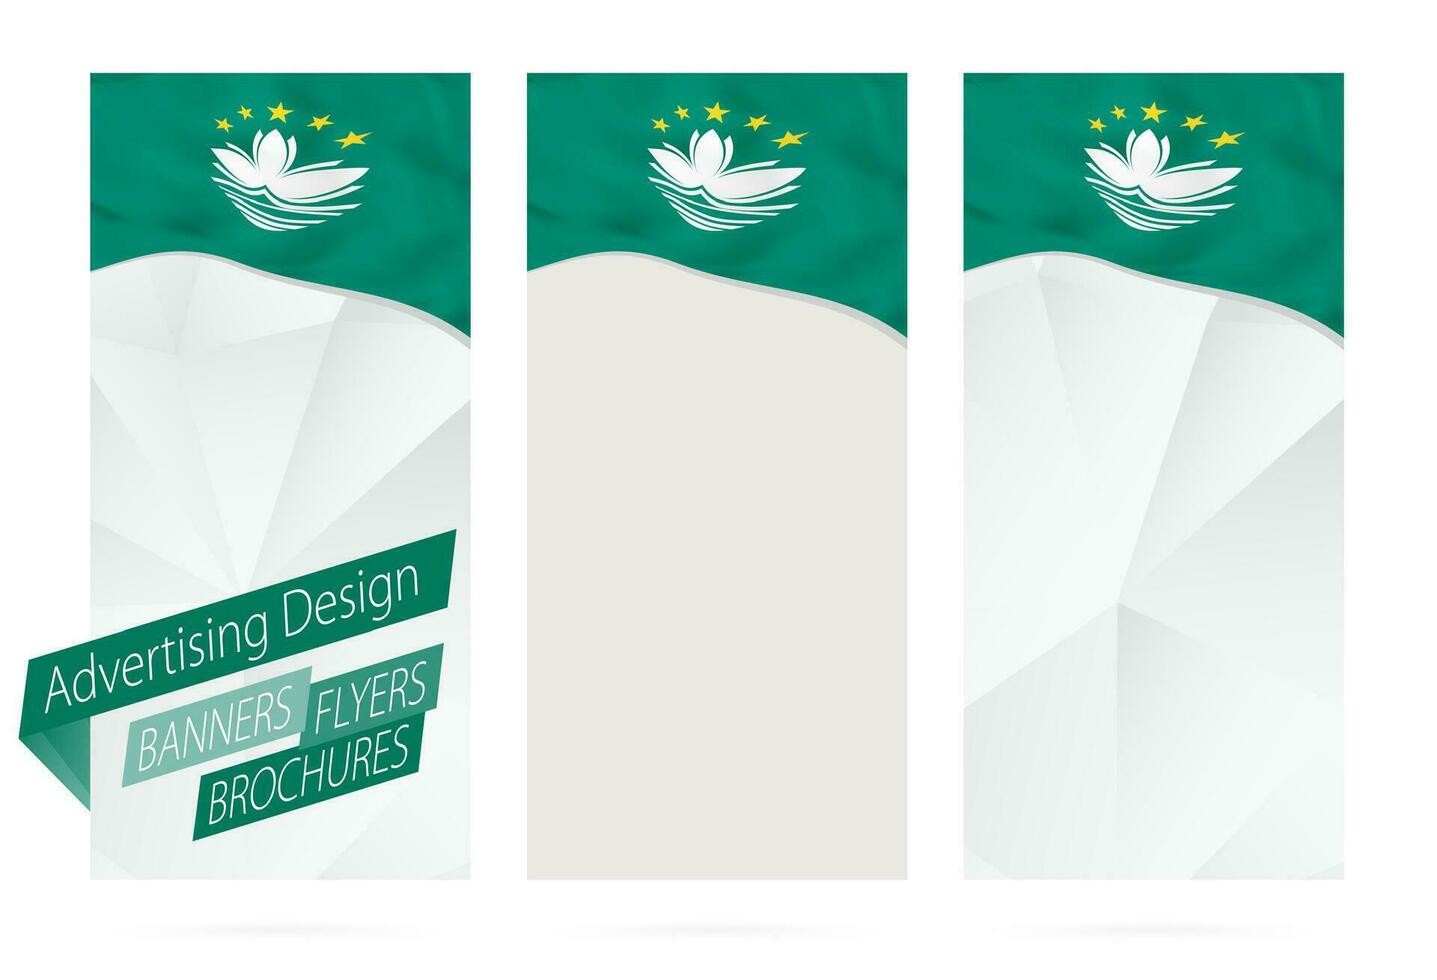 Design of banners, flyers, brochures with flag of Macau. vector